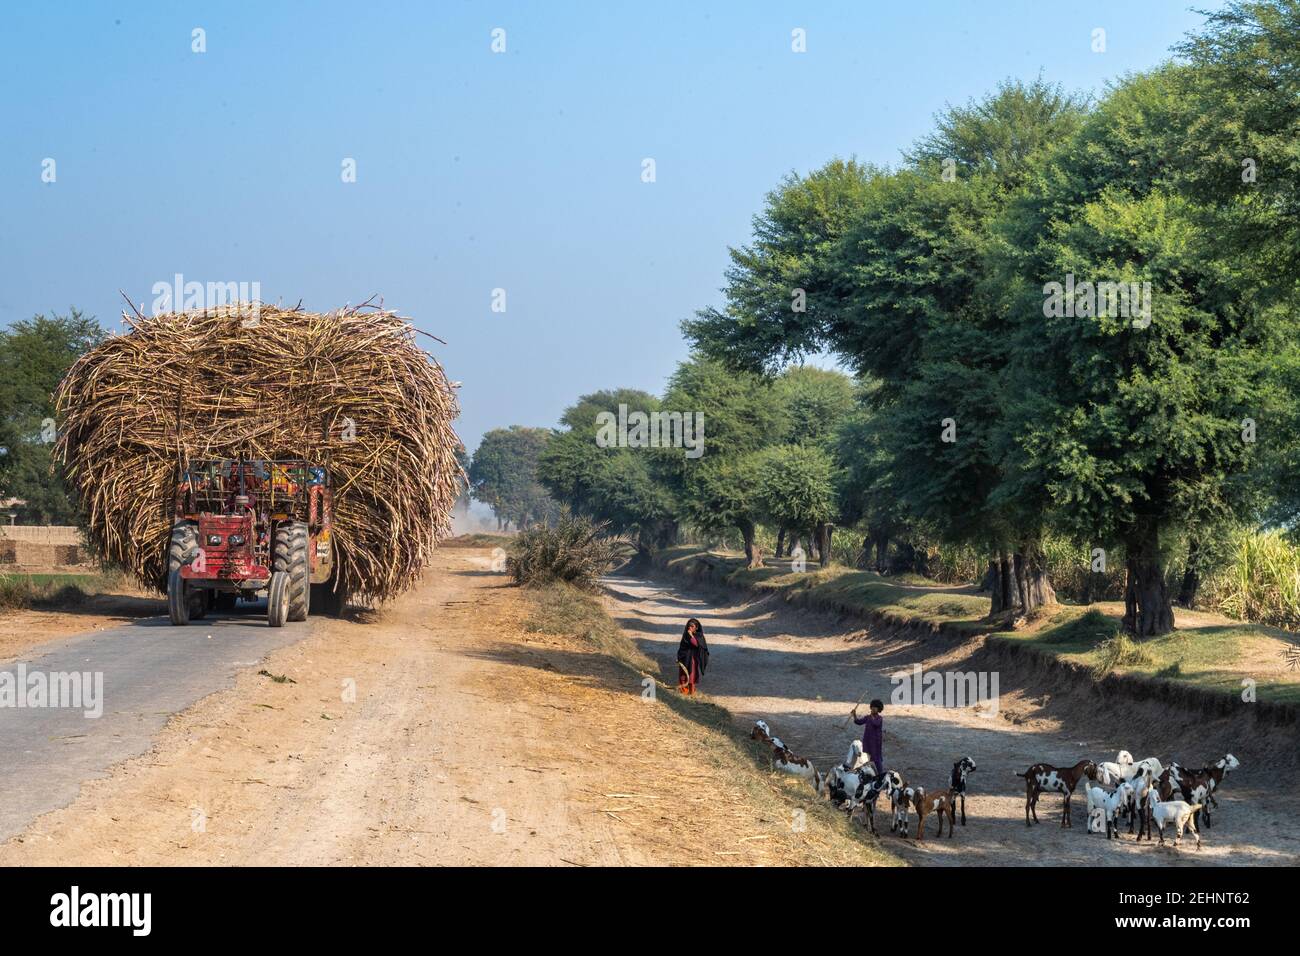 Man Carrying Hay with a Tractor, rural Punjab, Pakistan Stock Photo